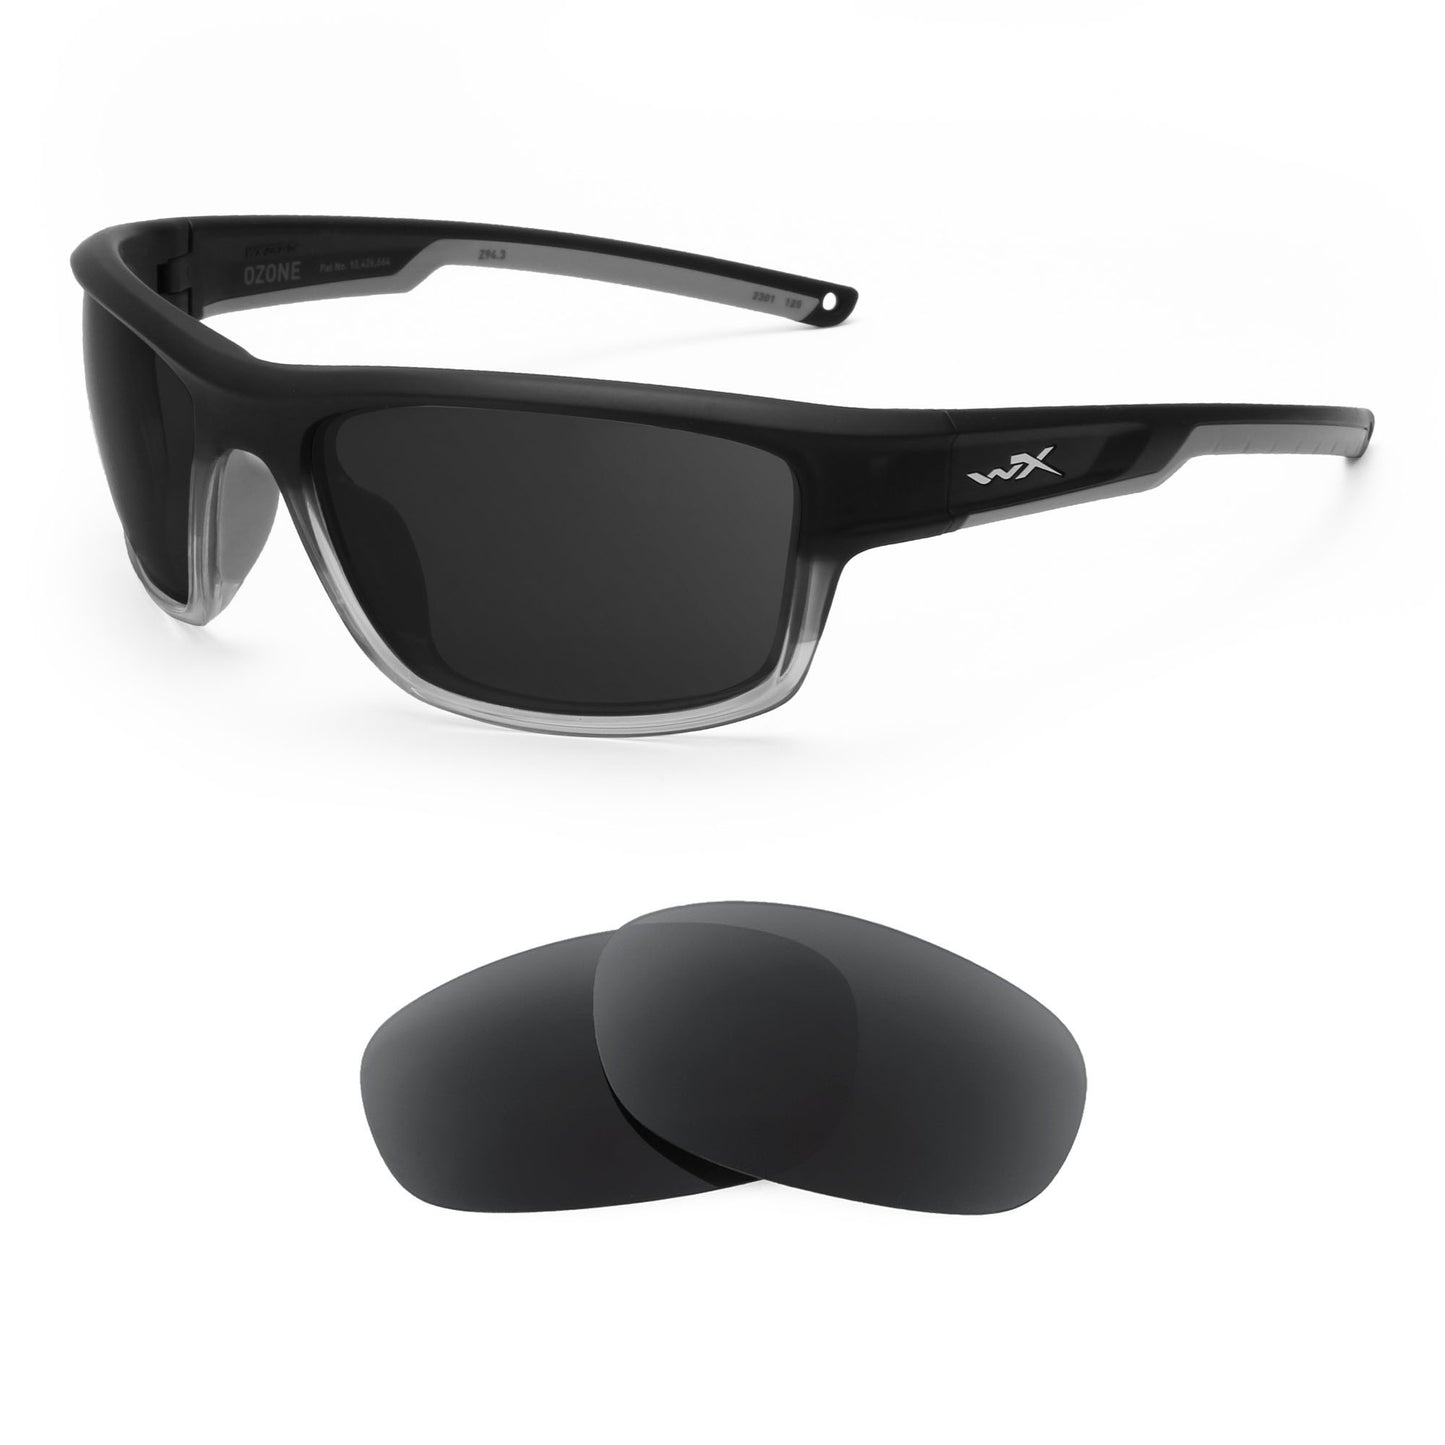 Wiley X Ozone sunglasses with replacement lenses